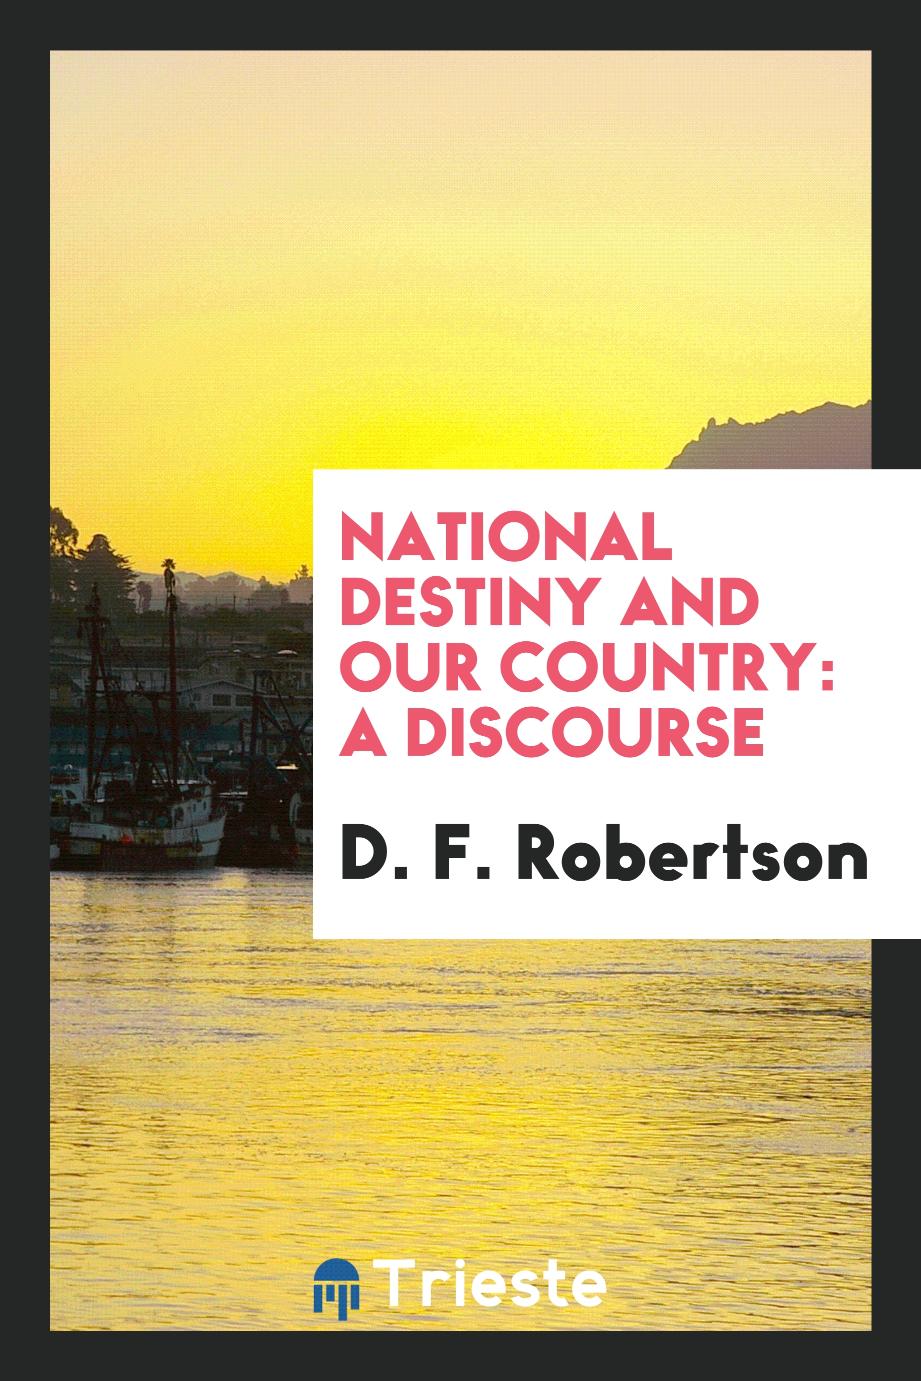 National Destiny and Our Country: A Discourse